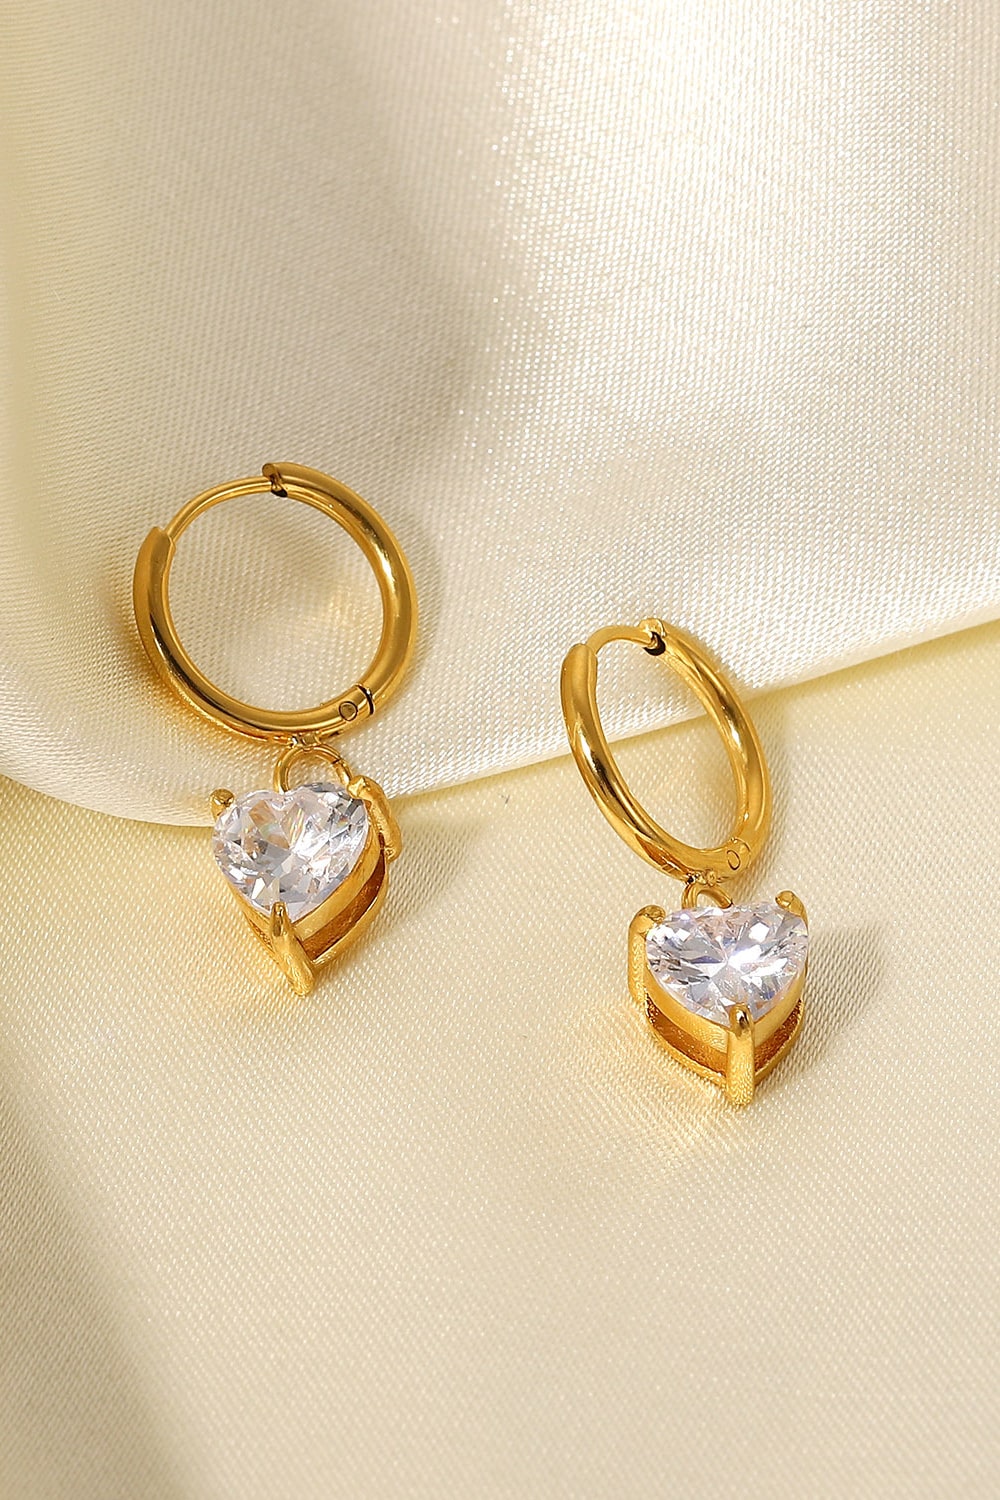 Shine Bright Gold-Plated Drop Earrings